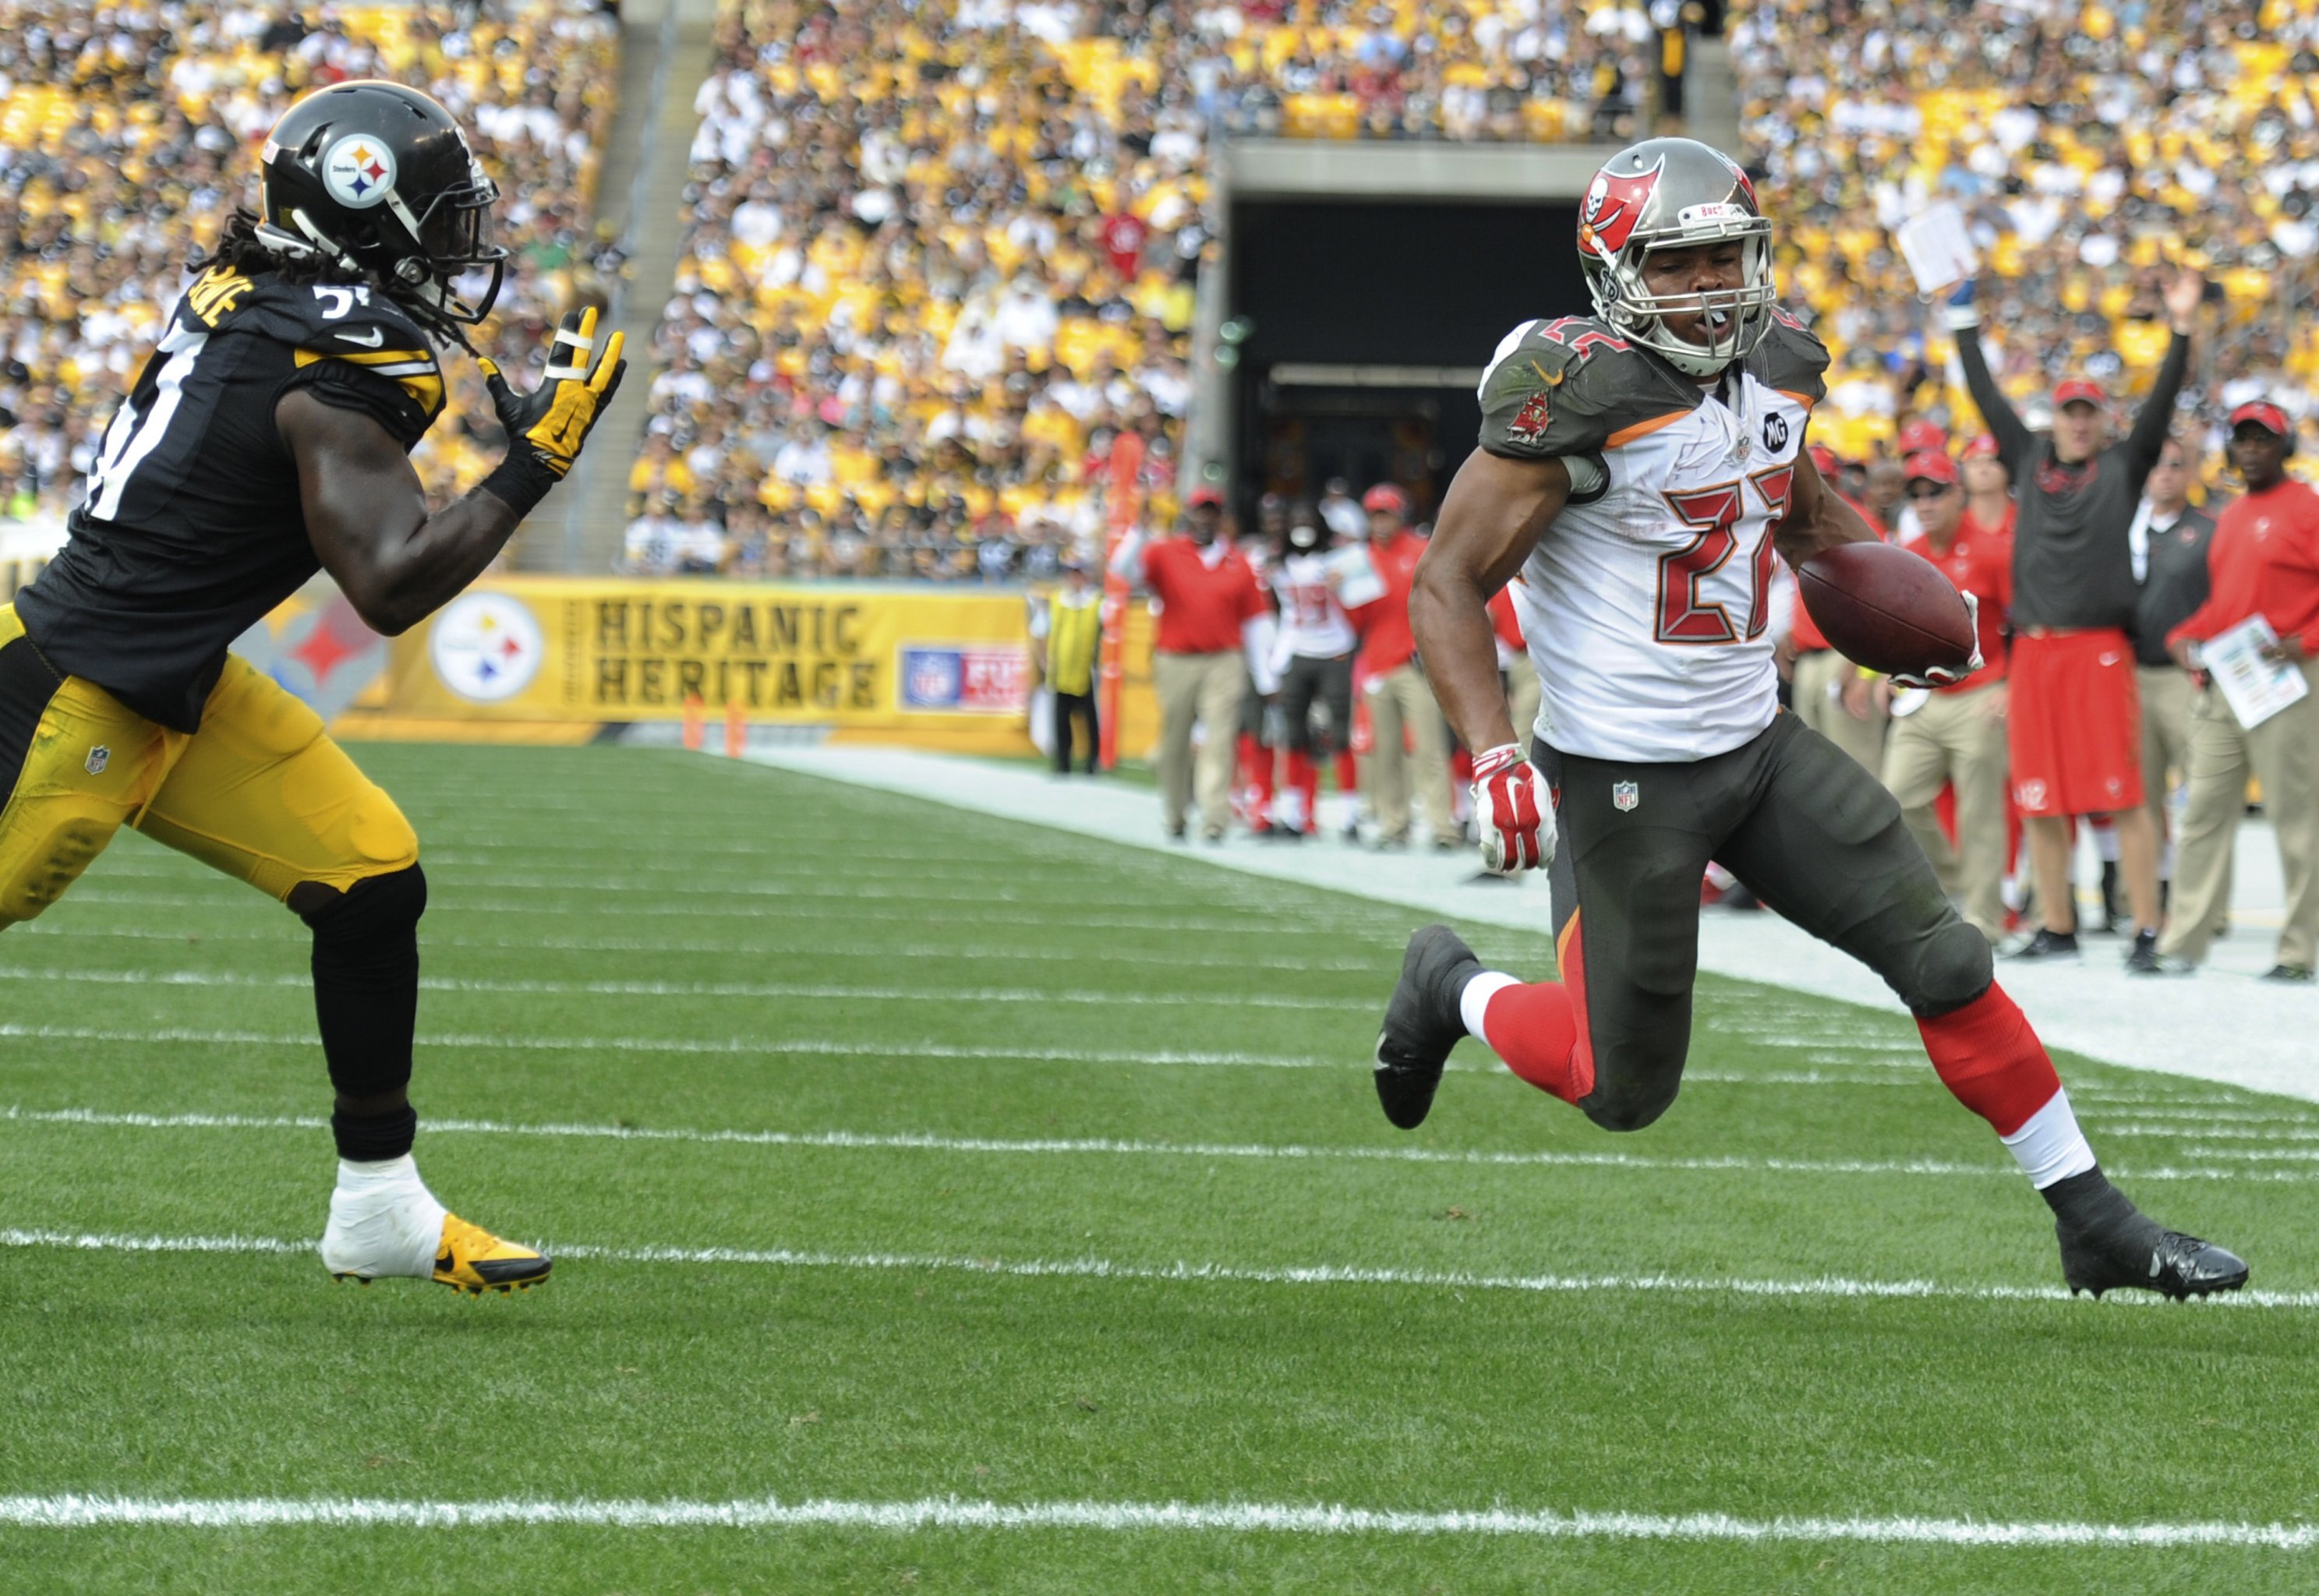 NFL: Buccaneers 18-20 Steelers : Pittsburgh dominates Tampa Bay with strong  defense and wins the game